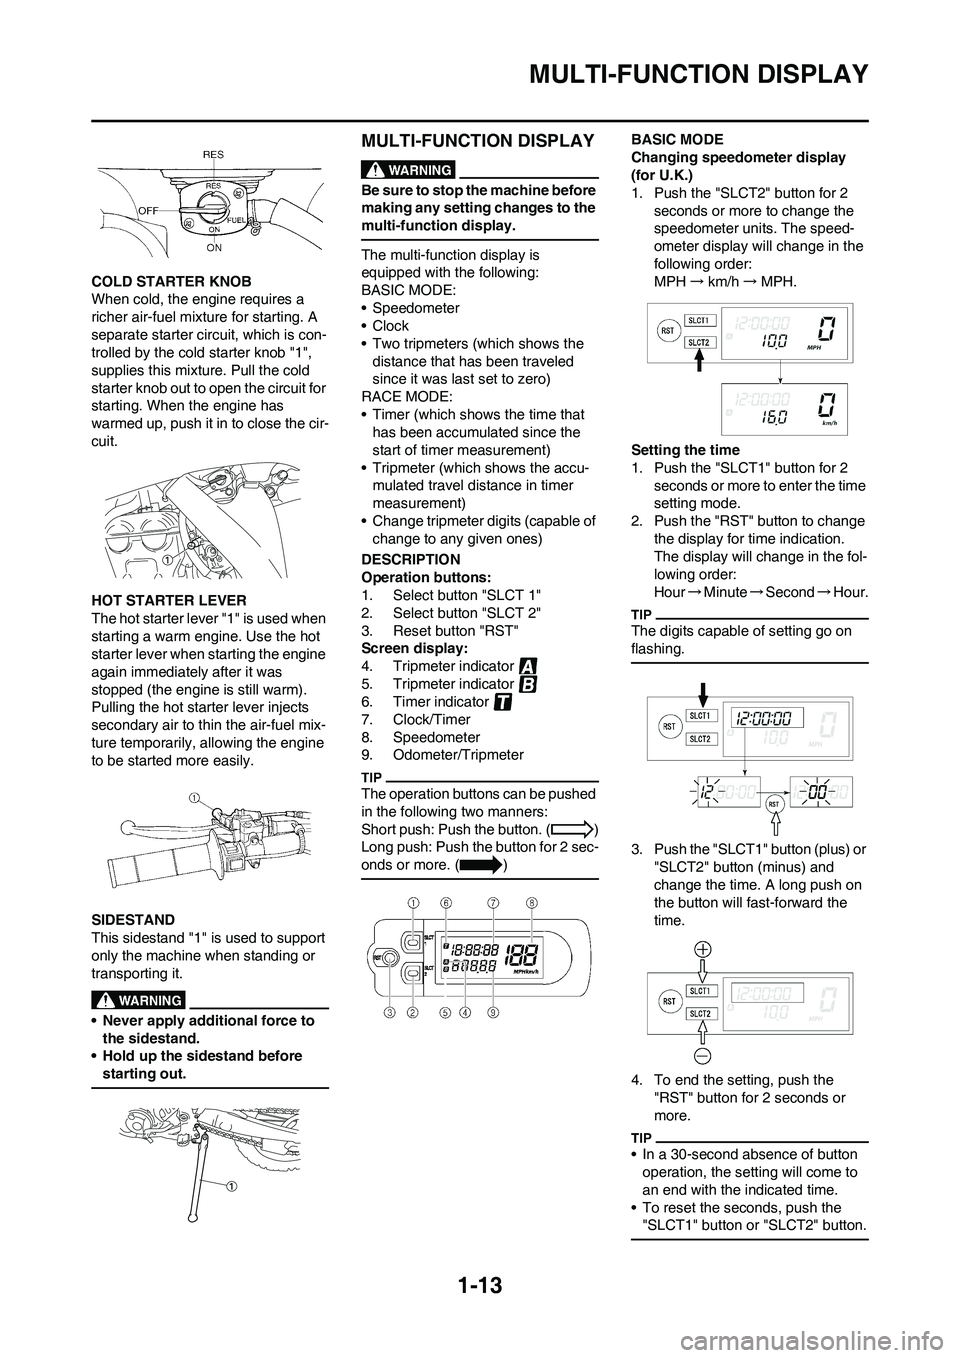 YAMAHA WR 450F 2010  Owners Manual 
1-13
MULTI-FUNCTION DISPLAY
COLD STARTER KNOB
When cold, the engine requires a 
richer air-fuel mixture for starting. A 
separate starter circuit, which is con-
trolled by the cold starter knob "1", 